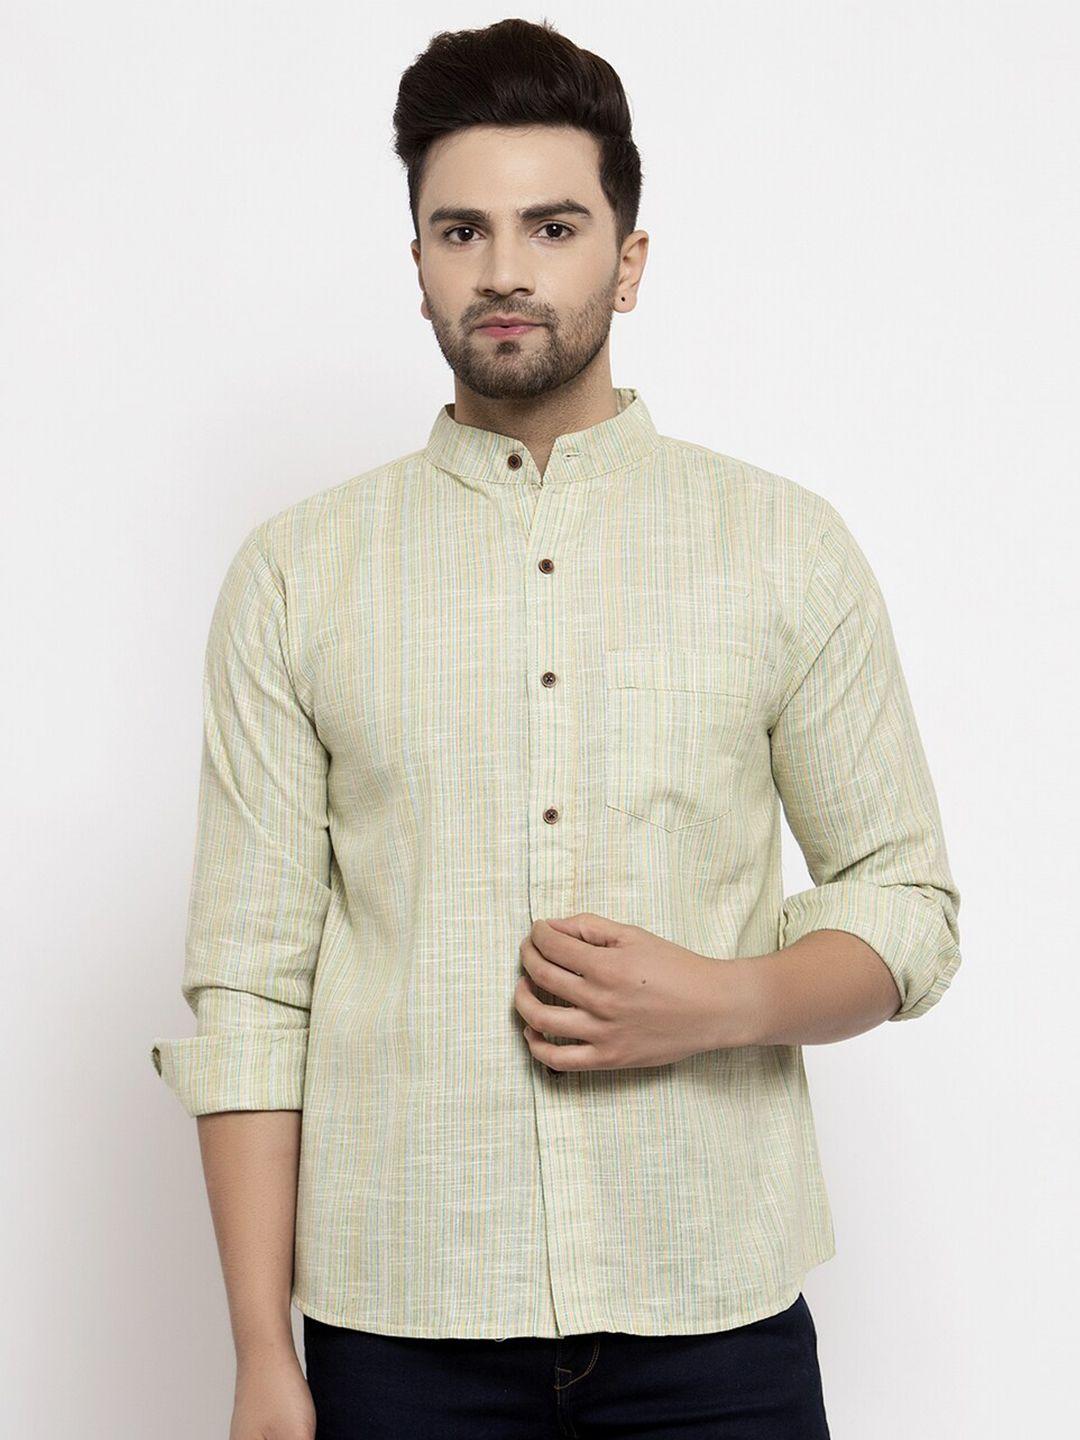 enchanted-drapes-slim-fit-vertical-stripes-band-collar-pure-cotton-casual-shirt